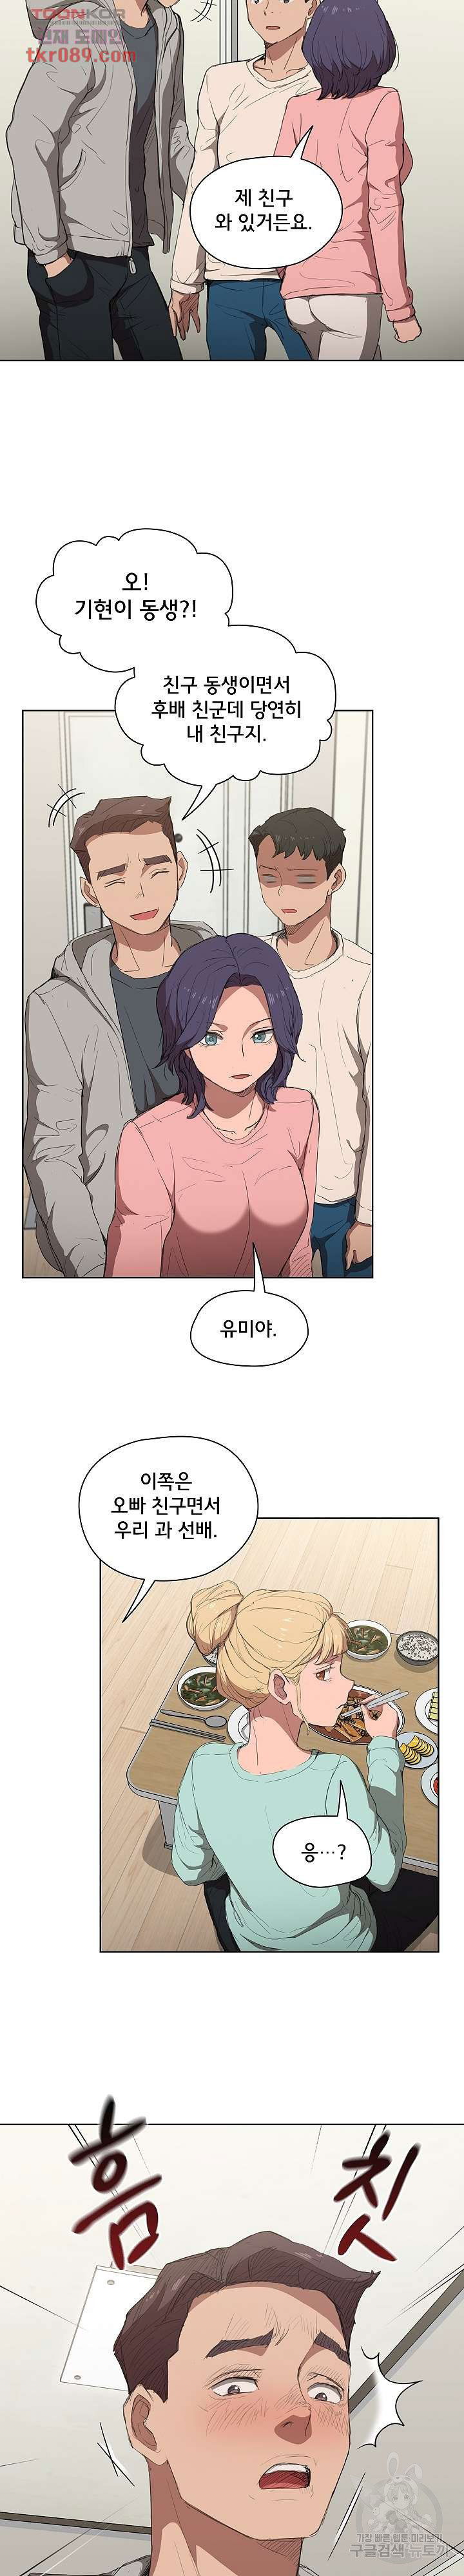 how-about-getting-lost-raw-chap-35-18